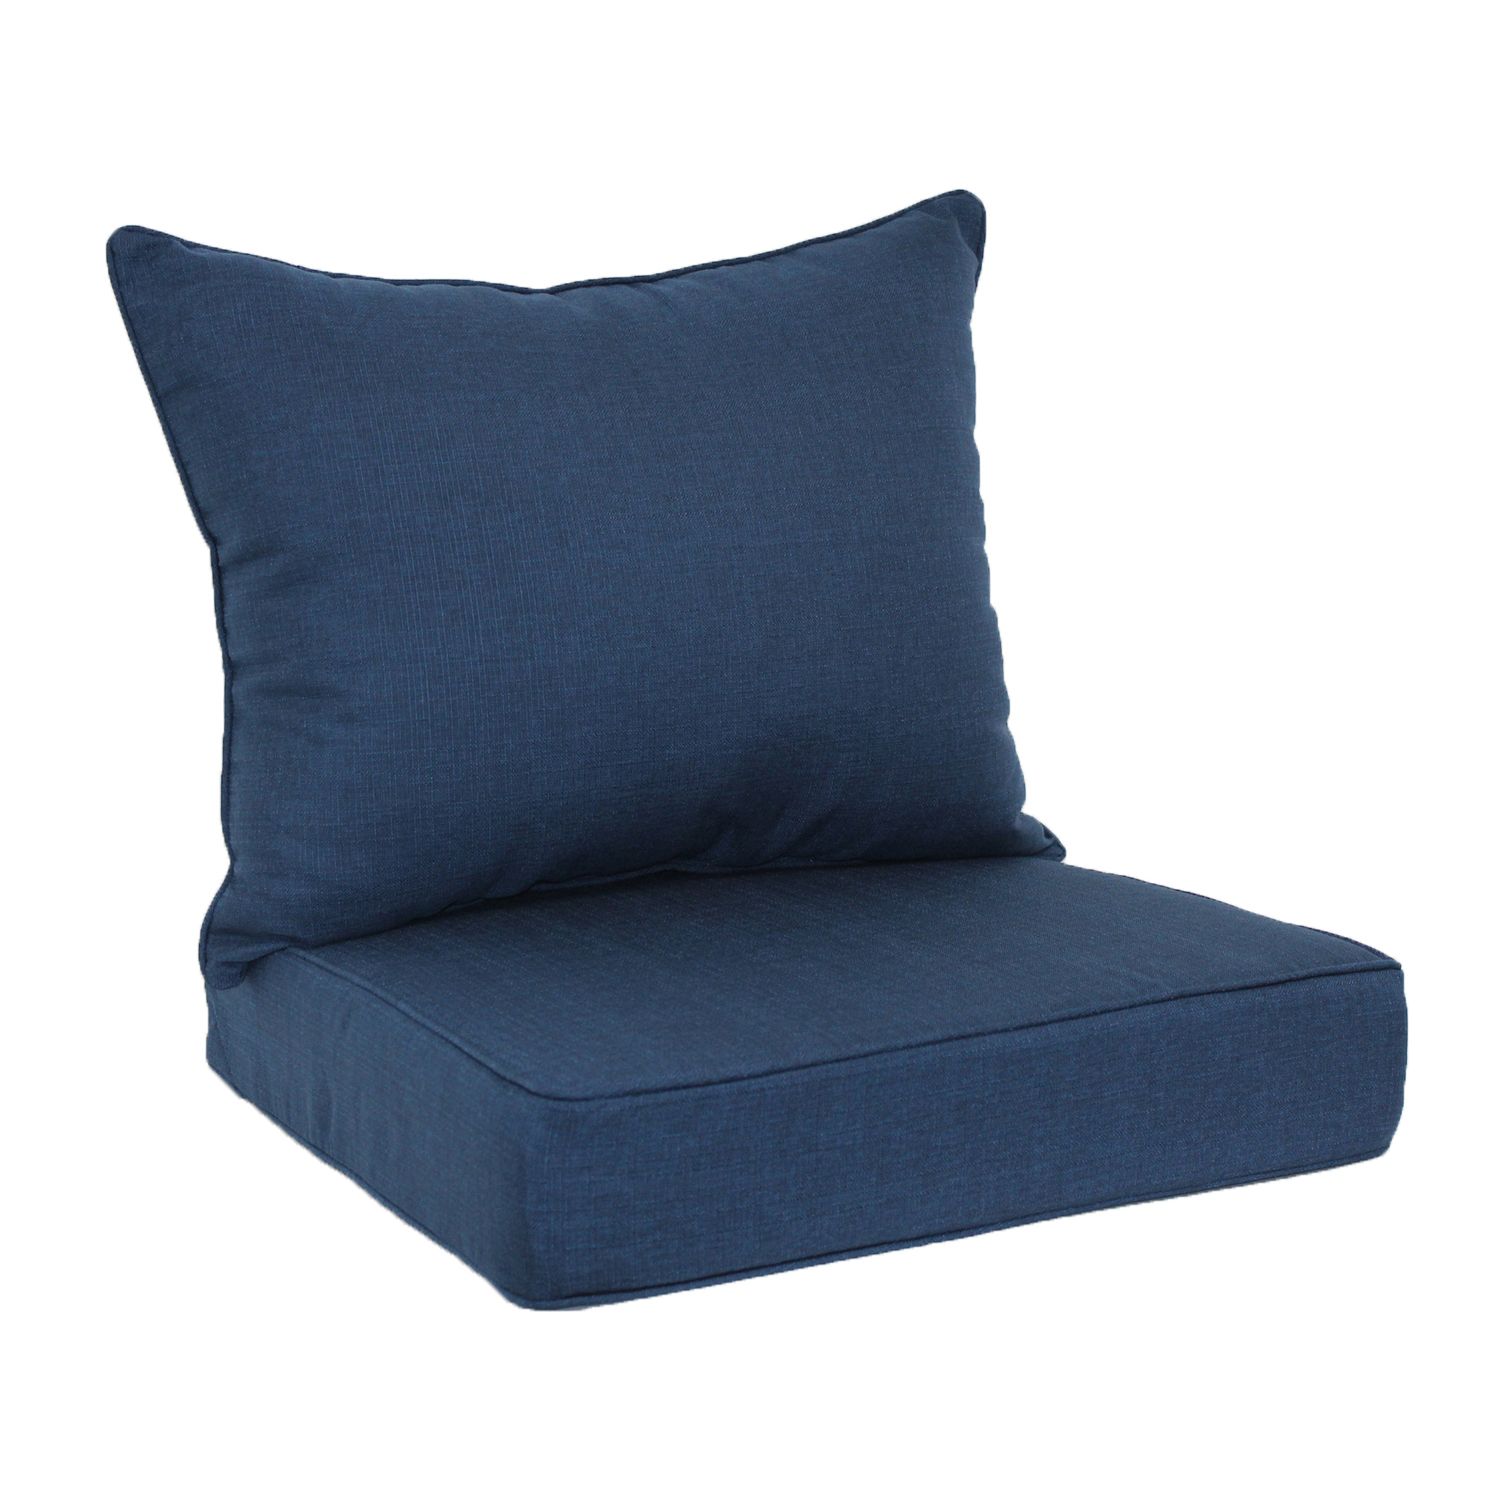 Outdoor Cushions: Comfy Patio Chair 